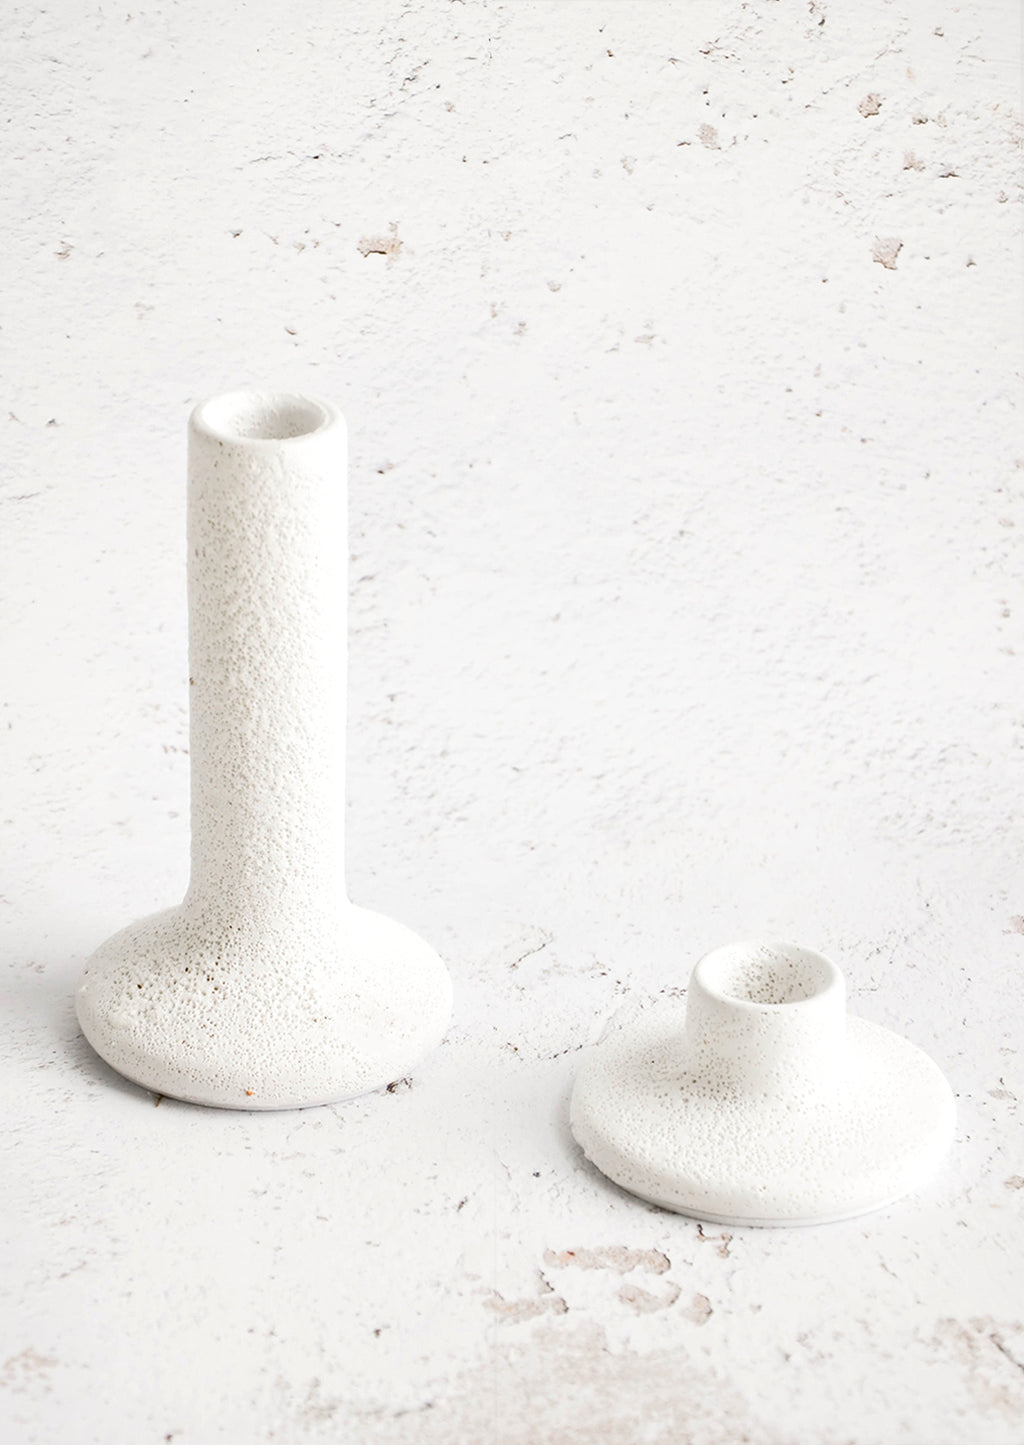 1: Taper candle holders in short and tall heights, made in rough textured white ceramic